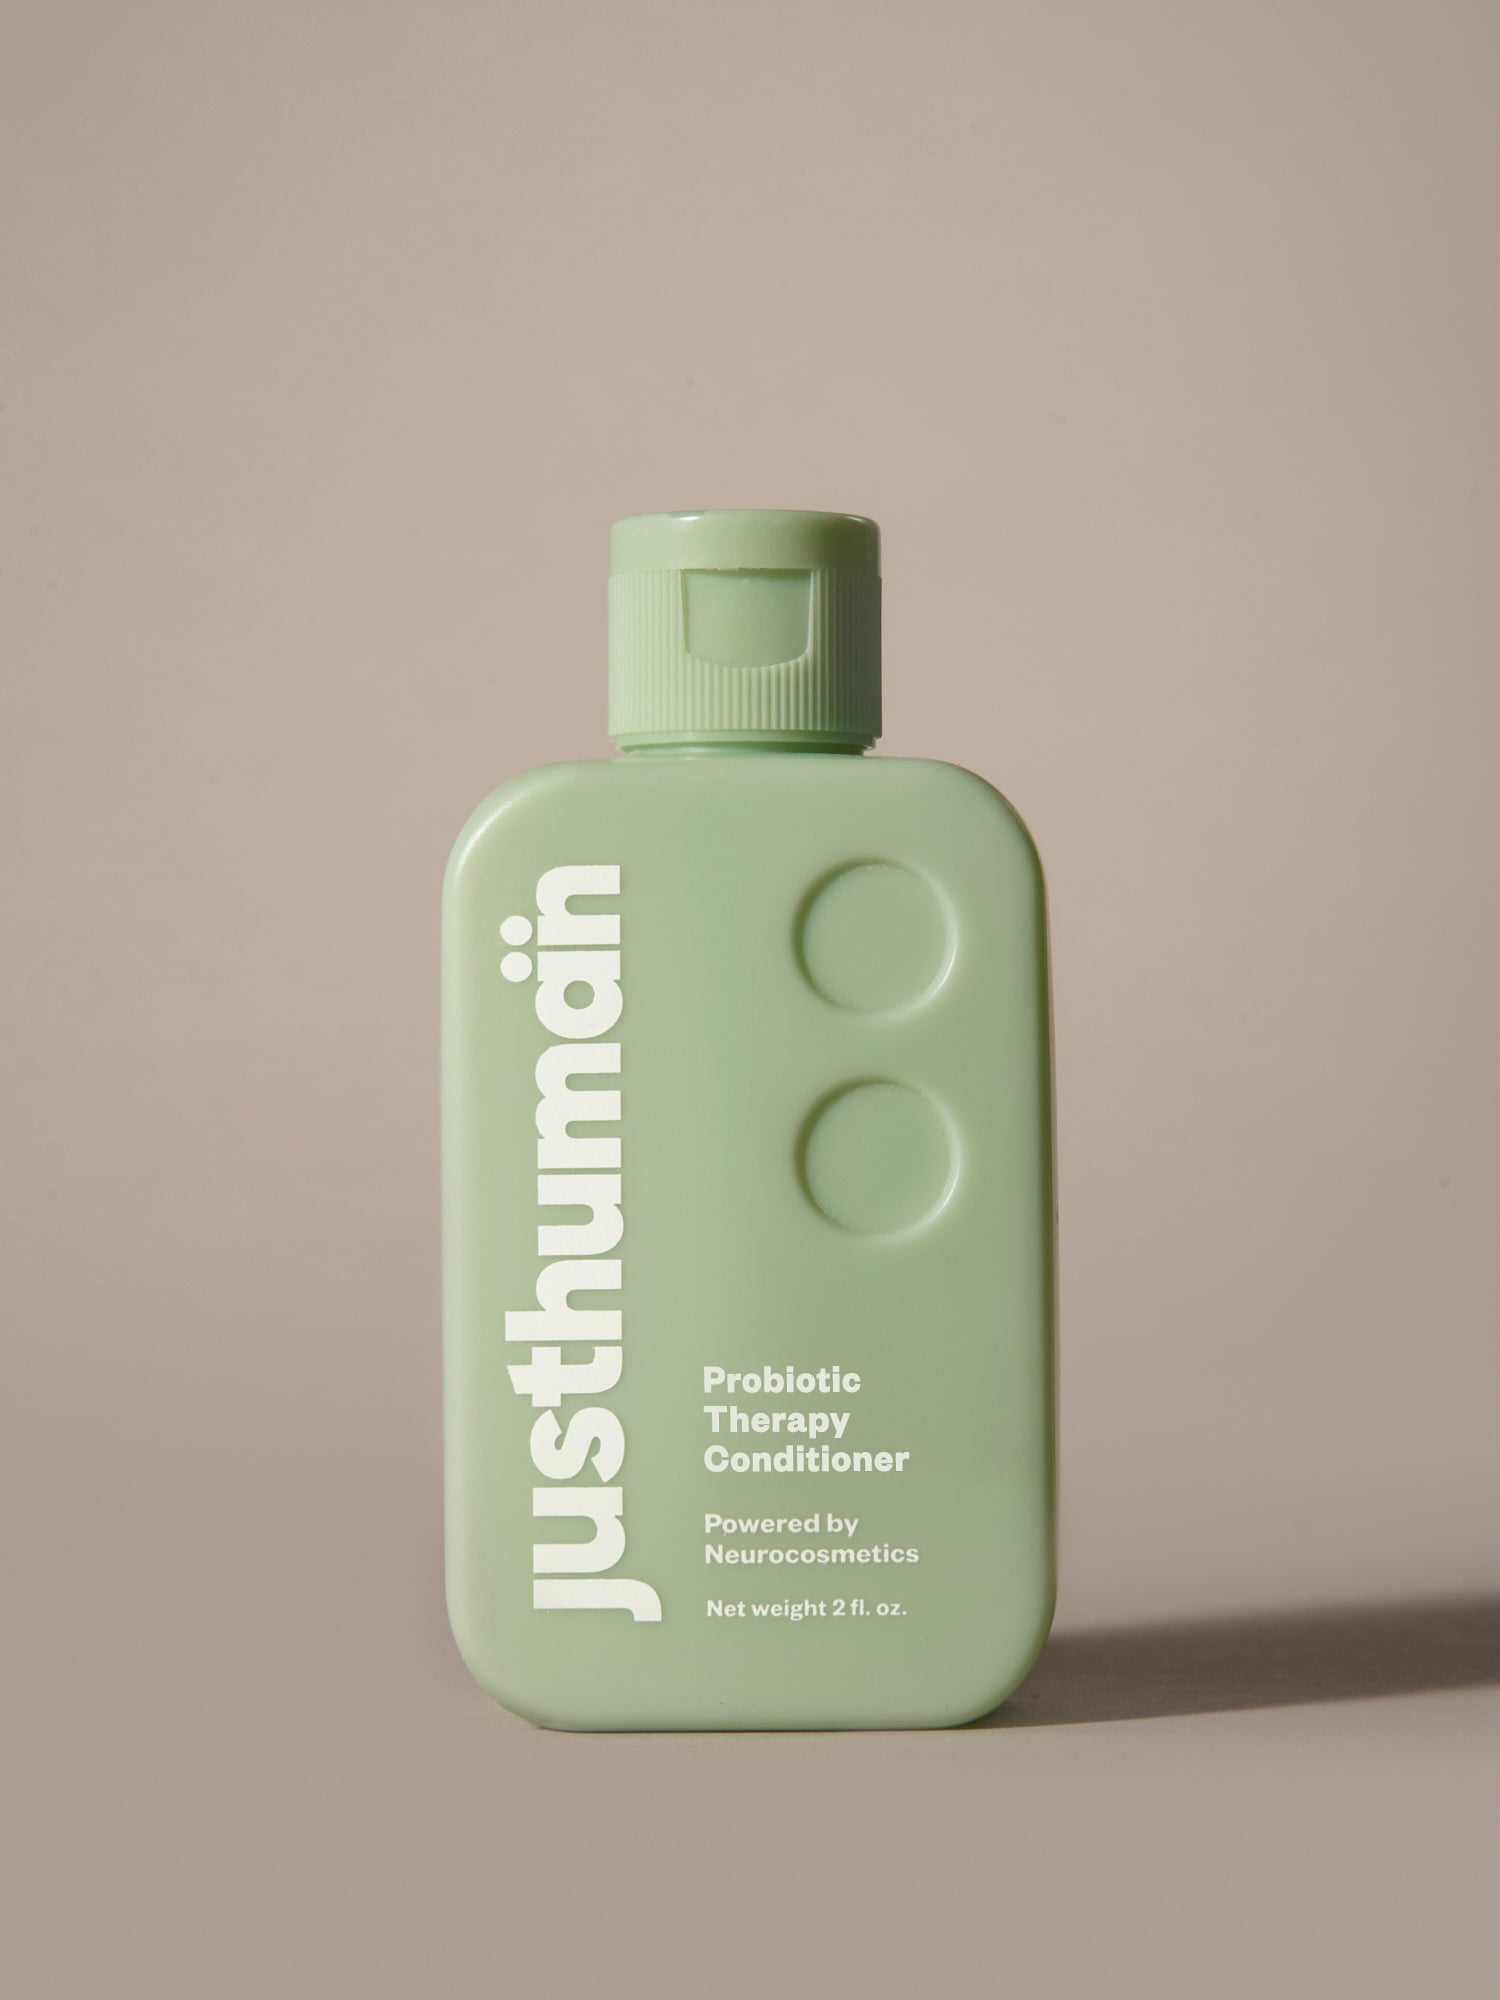 Probiotic Therapy Conditioner JustHuman